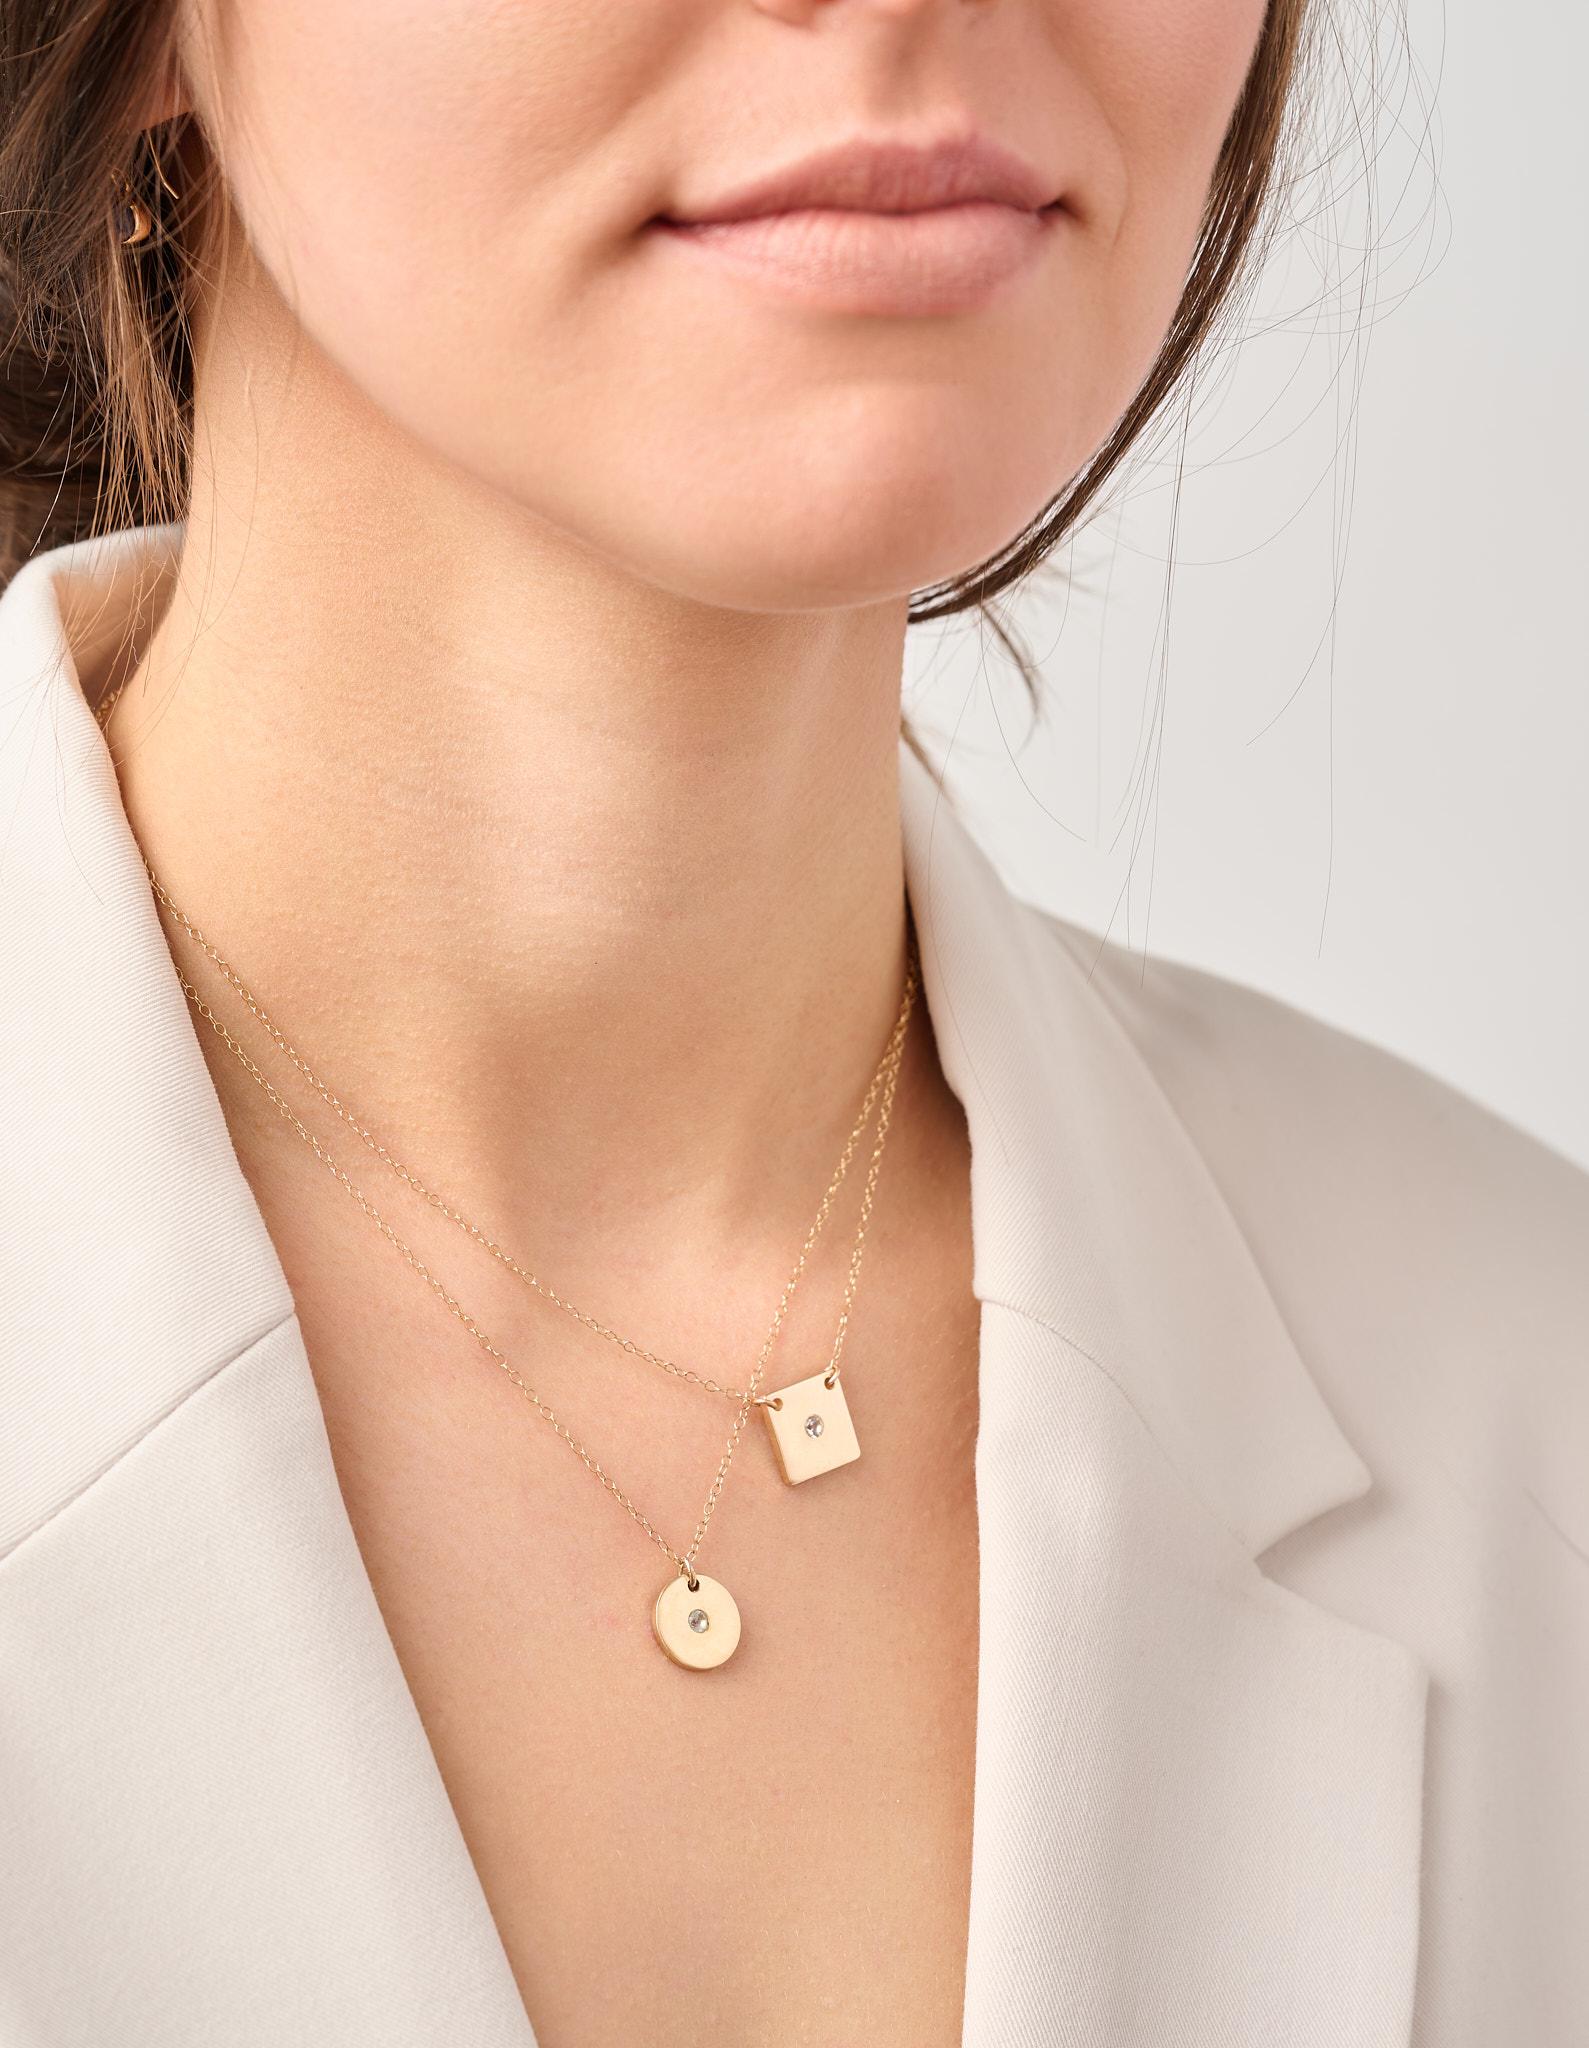 A beautiful, simple floating disk necklace with diamond accent. Perfect for everyday wear. Heirloom quality.

-14k solid gold
-3mm diamond (.48 ct)
-gypsy setting
-12mm 18k disk (1/2